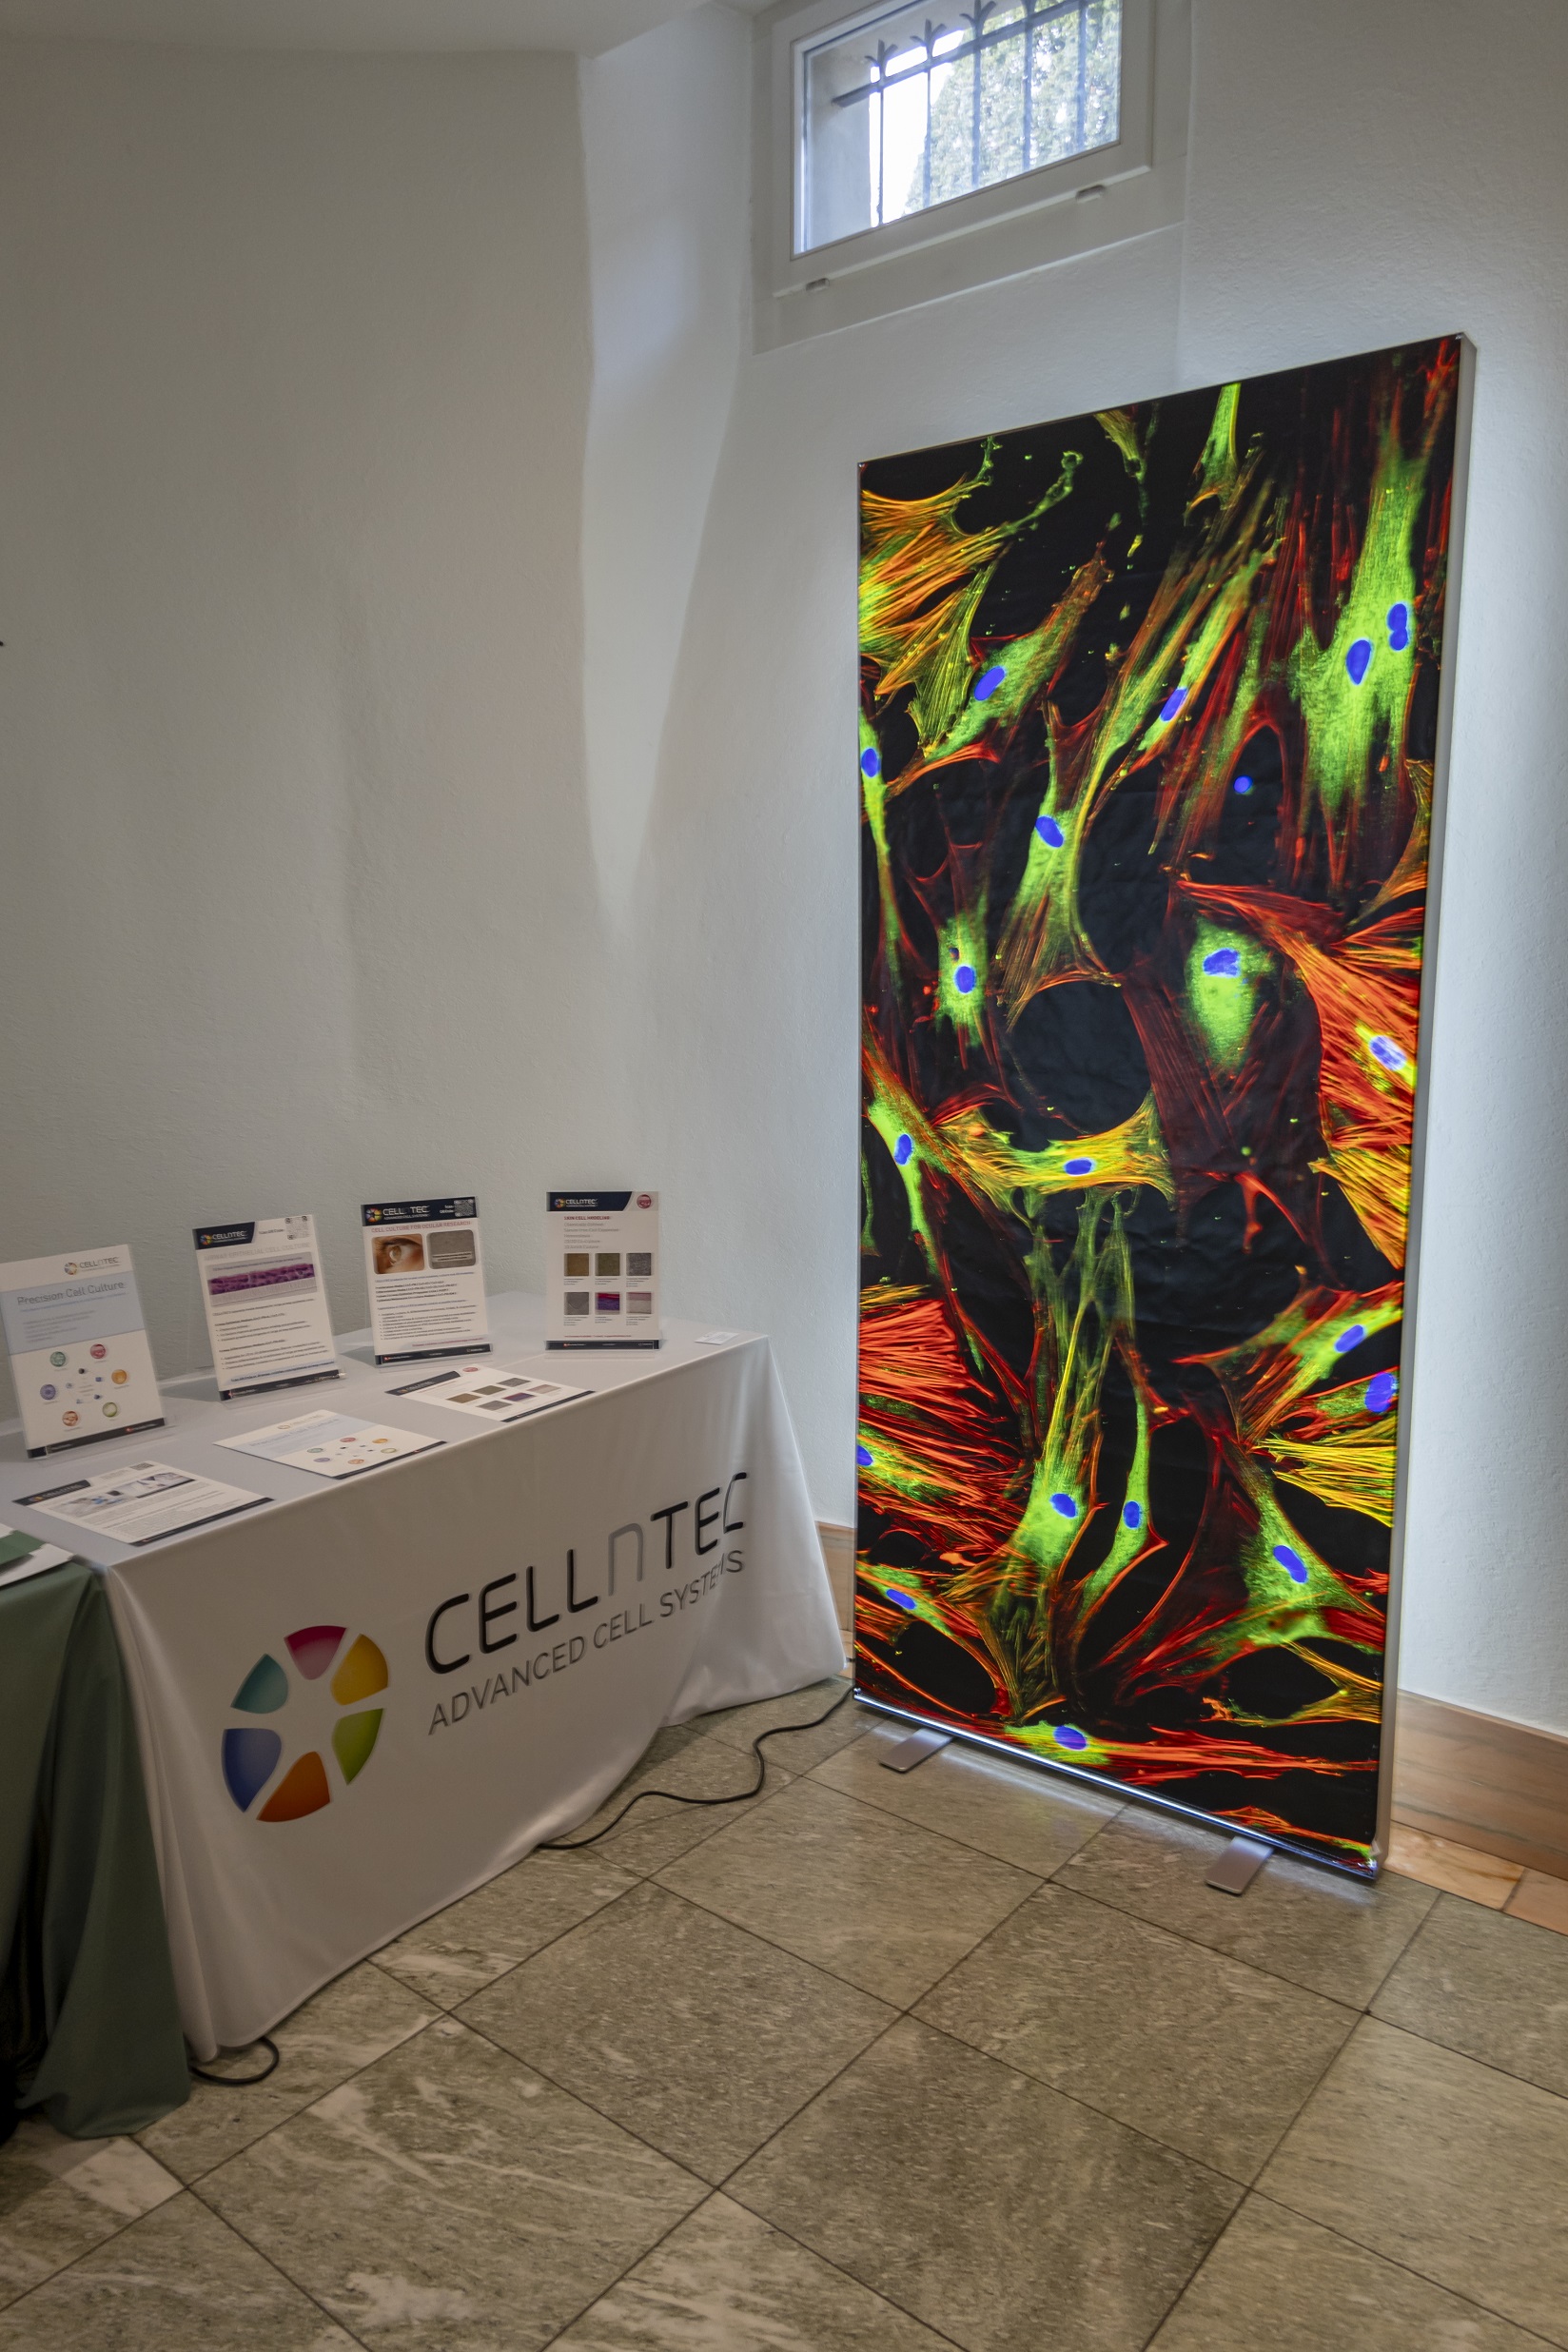 cellNtec booth at SCRM Annual Meeting 2023